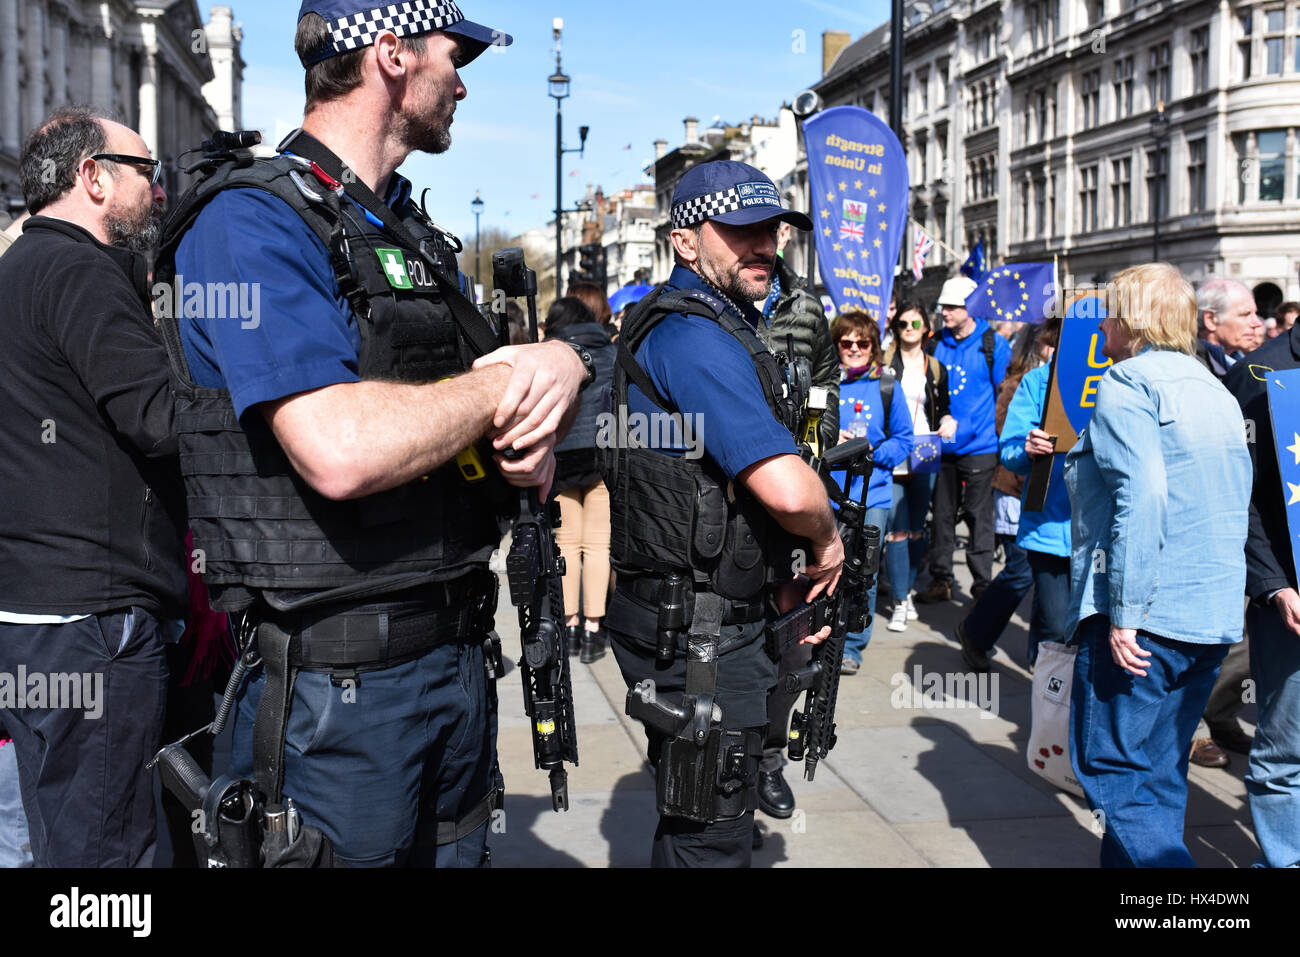 London, UK. 25th Mar, 2017. Firearms officers guard the March for Europe. Thousands marched from Park Lane to Parliament Square to oppose Brexit and support the European Union. Credit: Jacob Sacks-Jones/Alamy Live News. Stock Photo